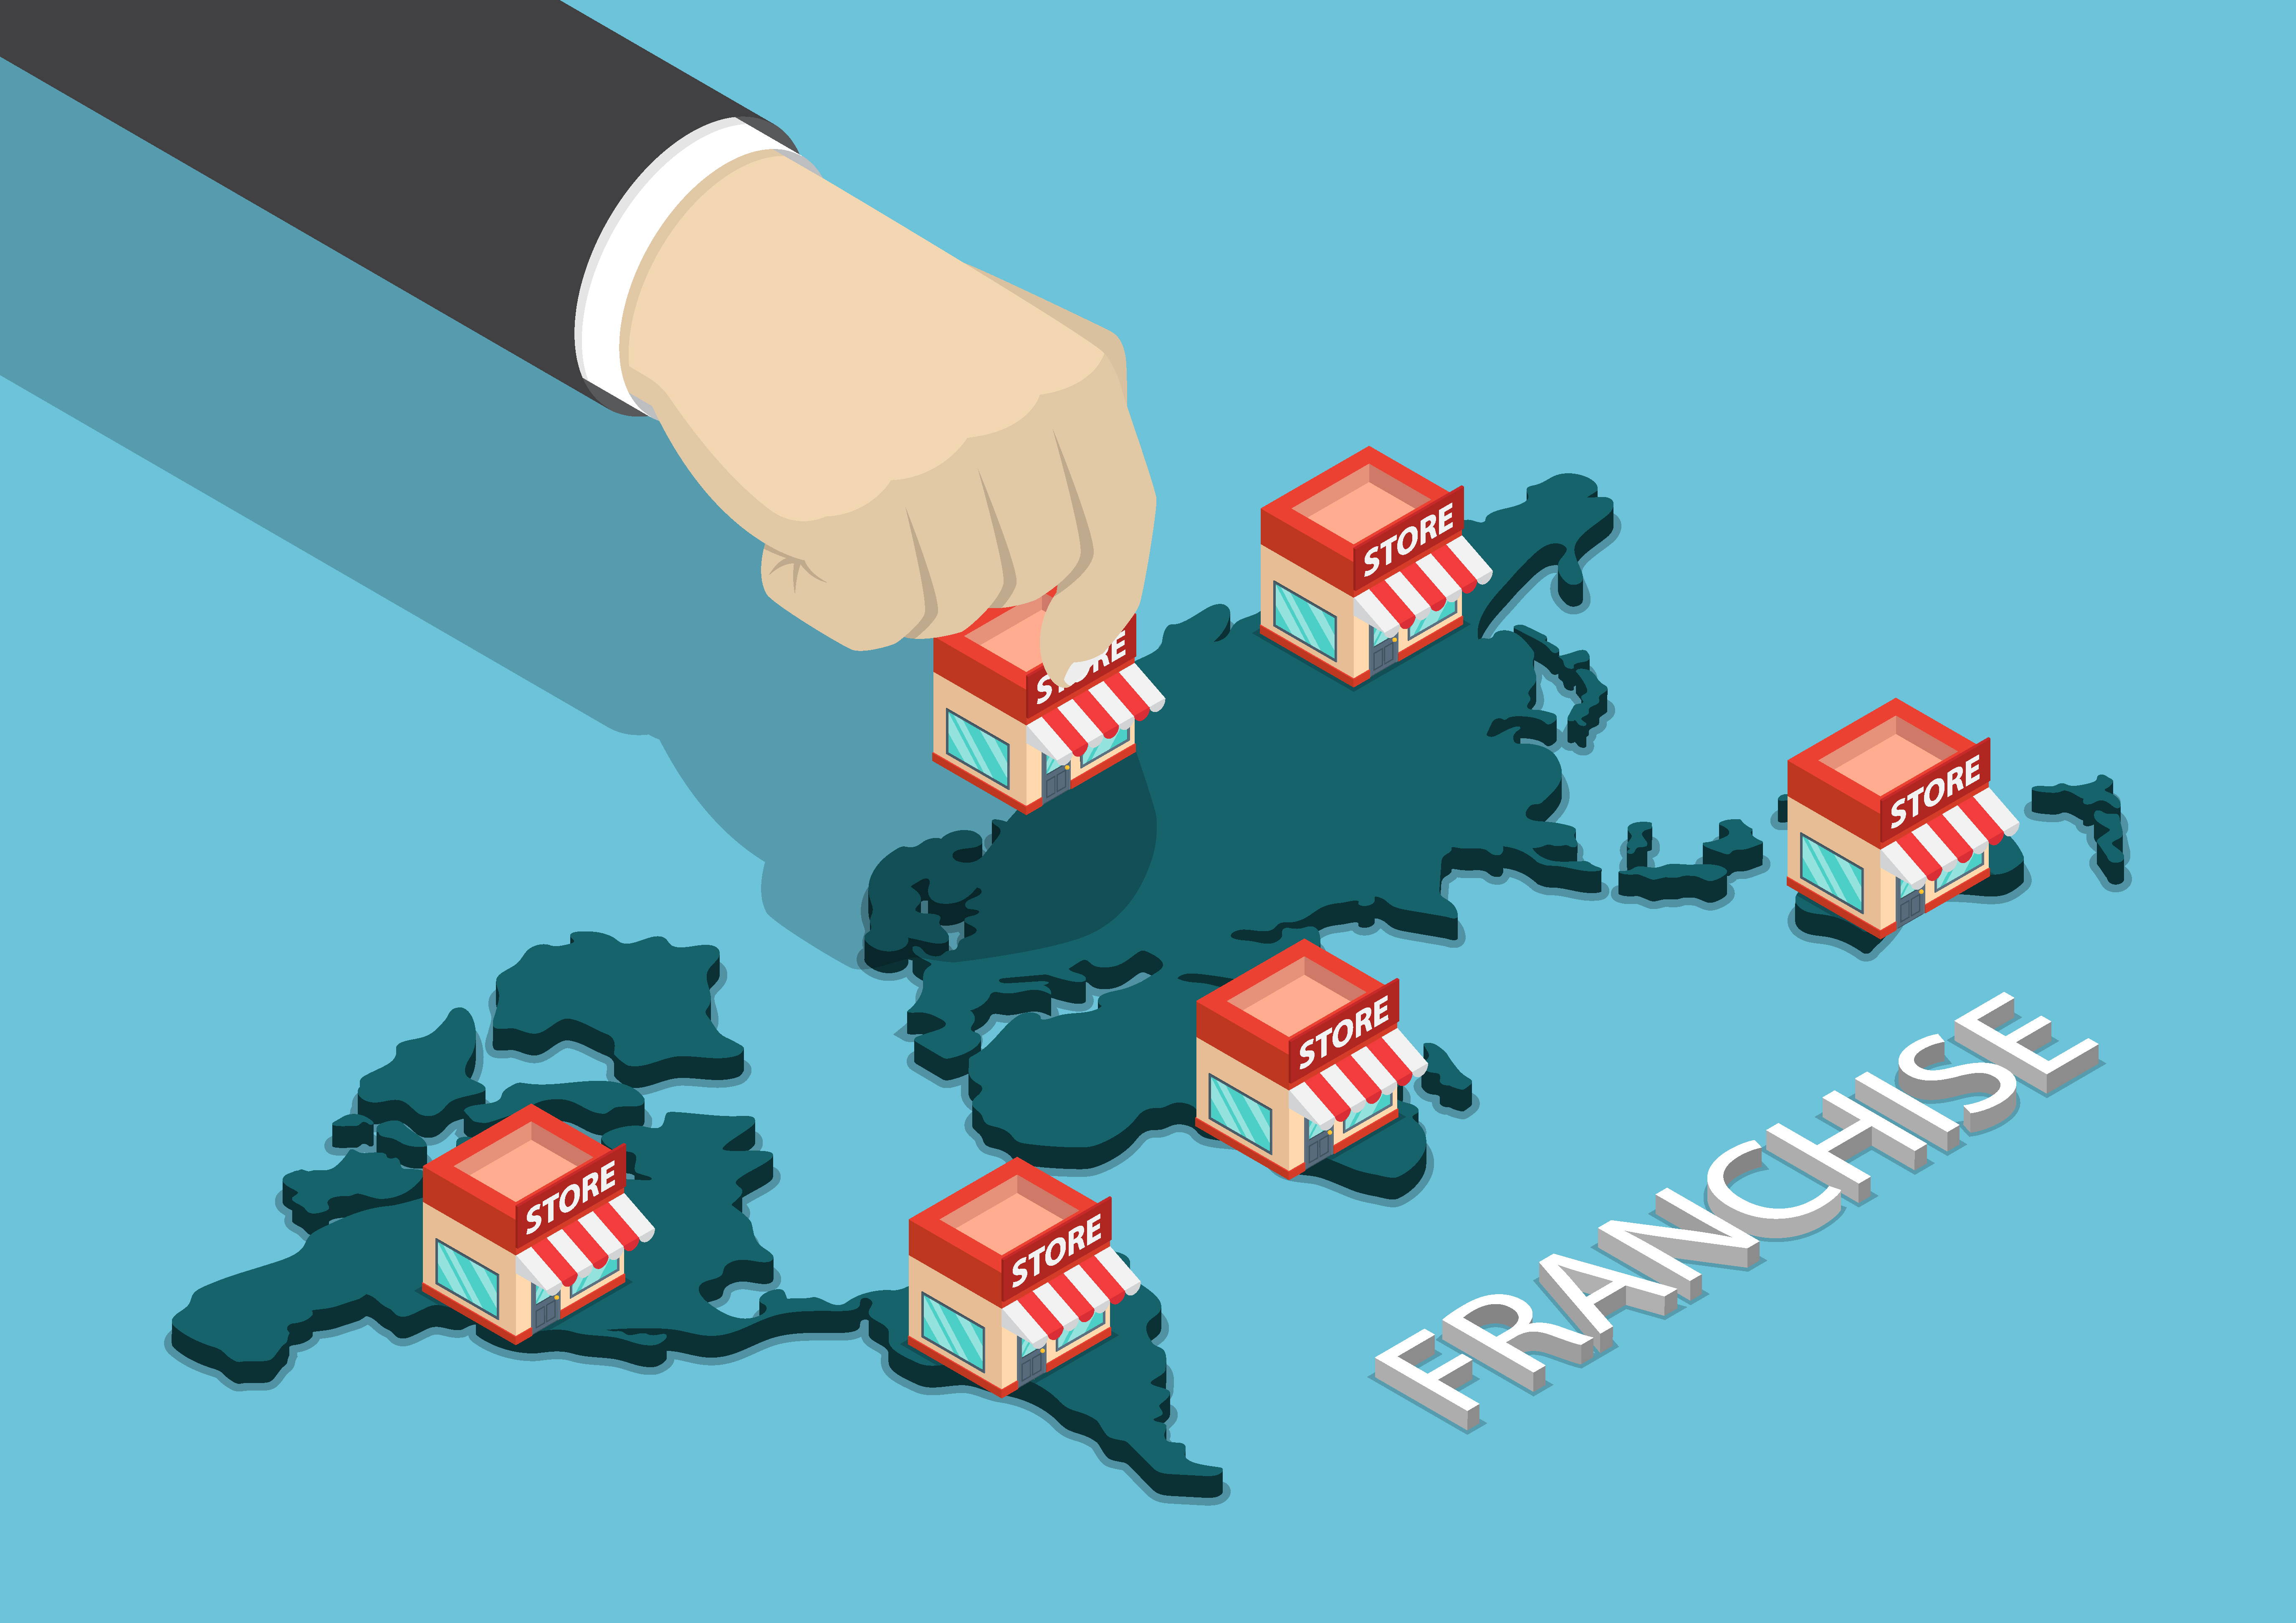 Why Buy A Franchise? Learn More: https://sfcnj.com/why-buy-a-franchise/